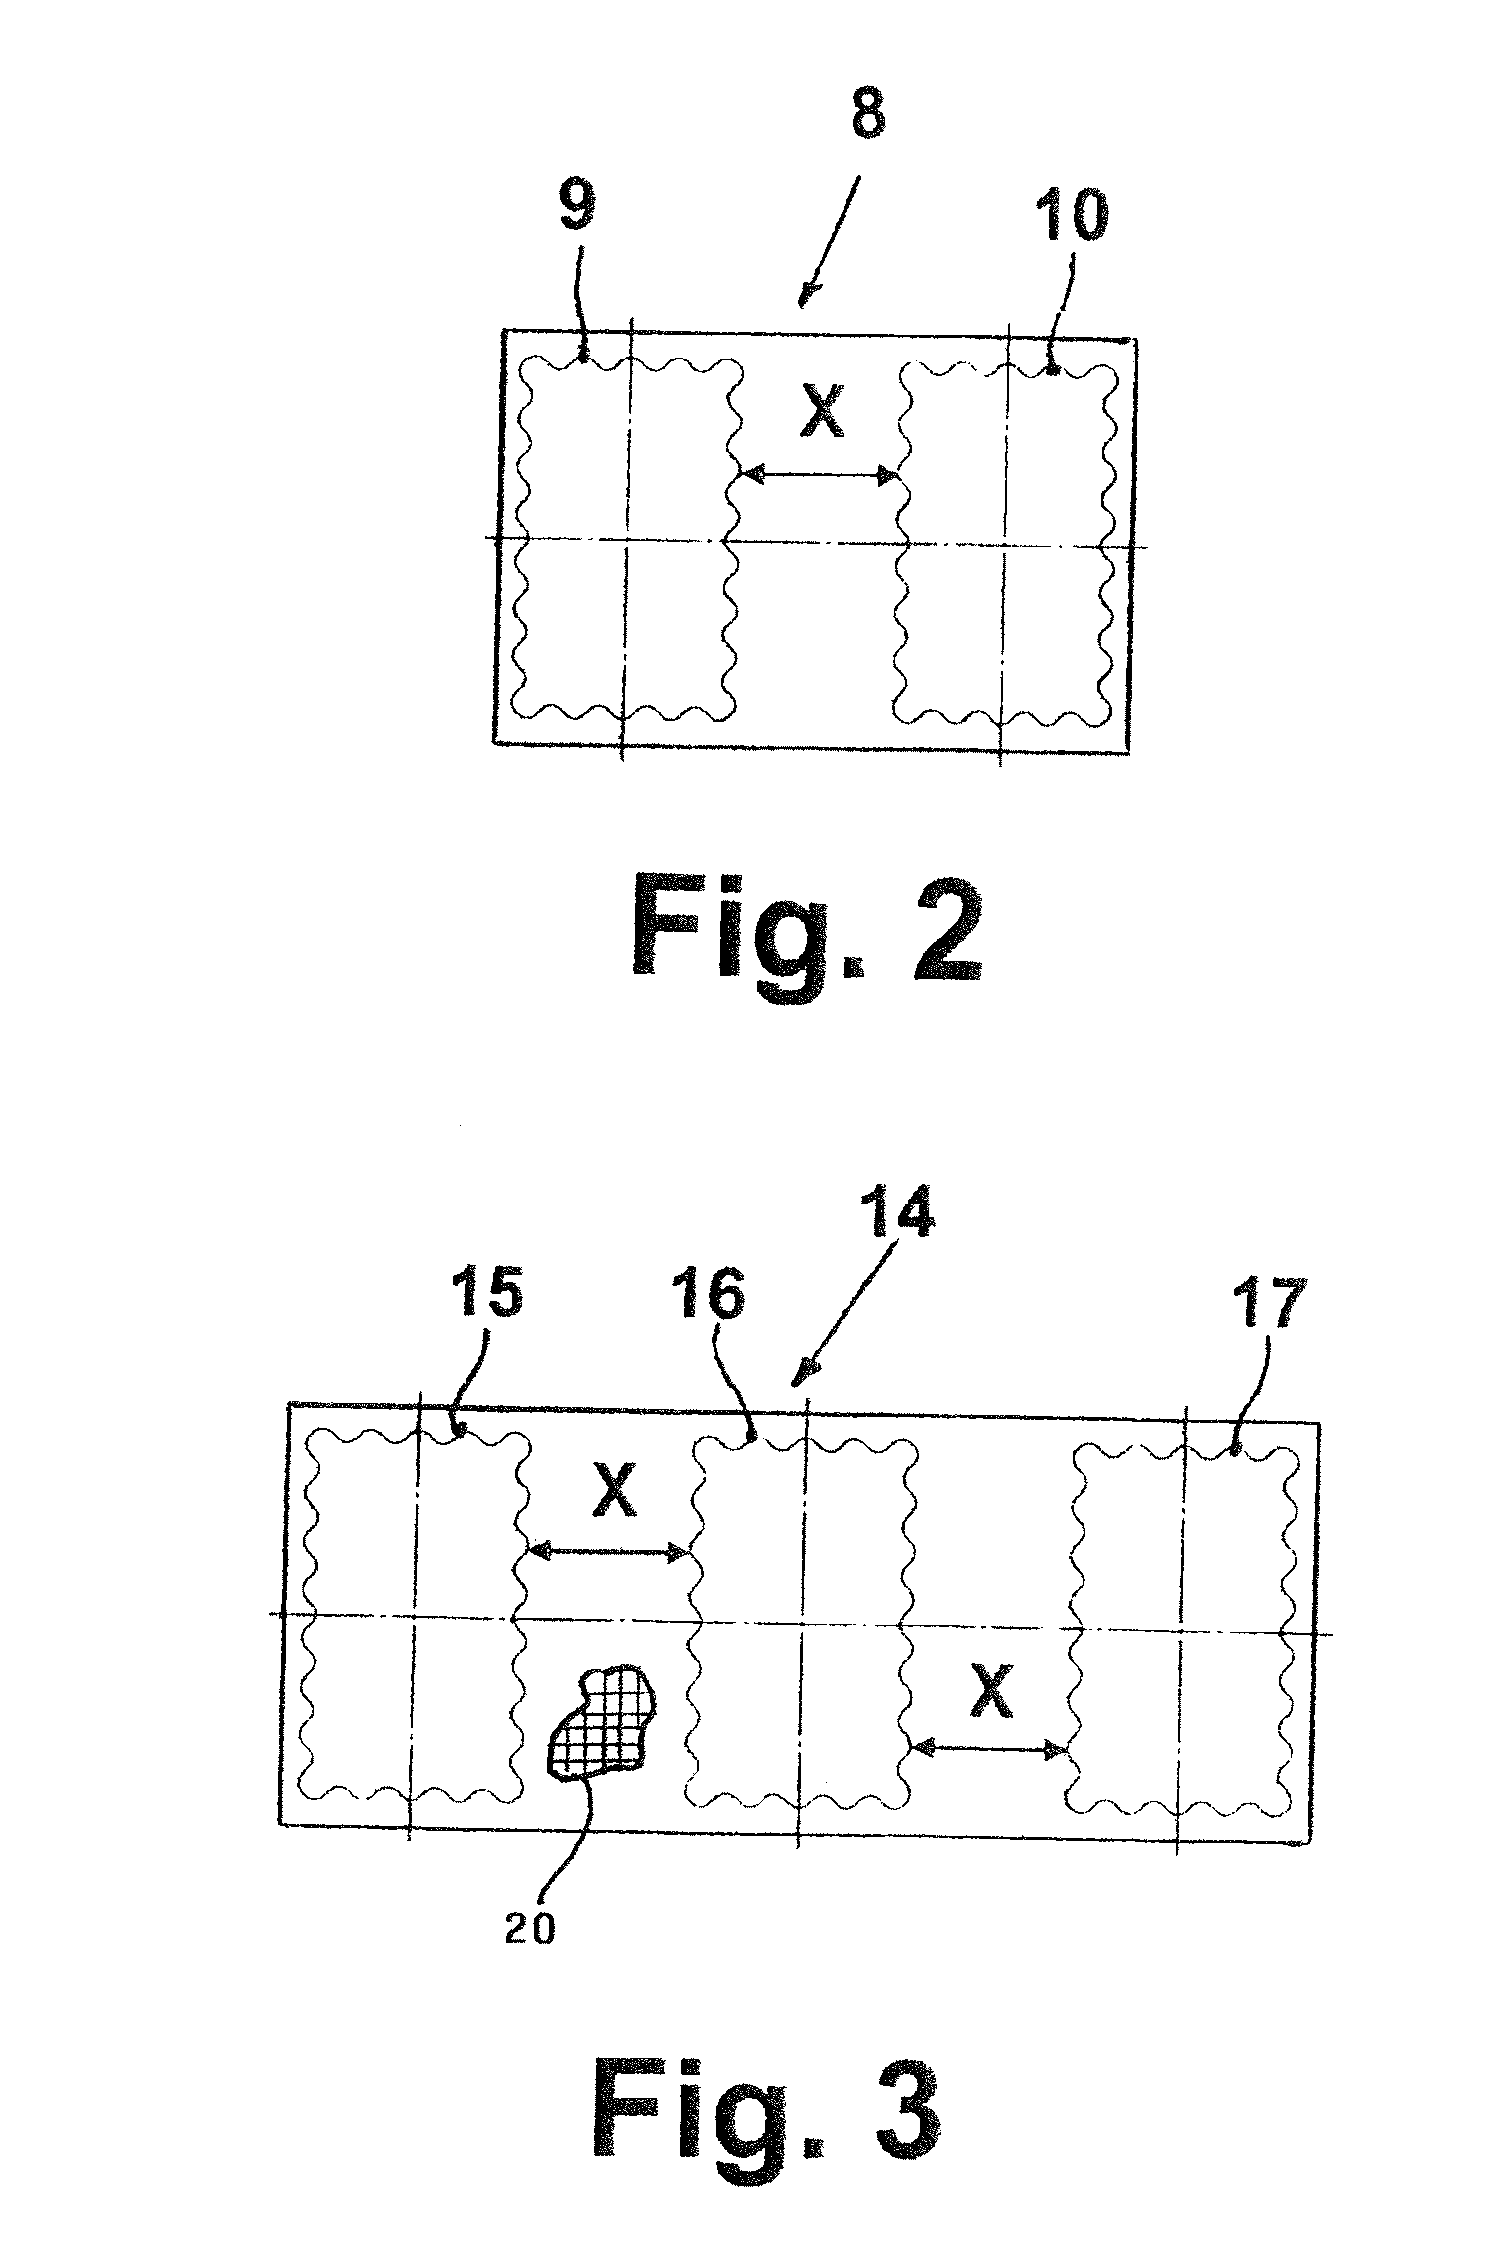 Arrangement for monitoring a conveyor system to detect damage to the conveyor belt thereof